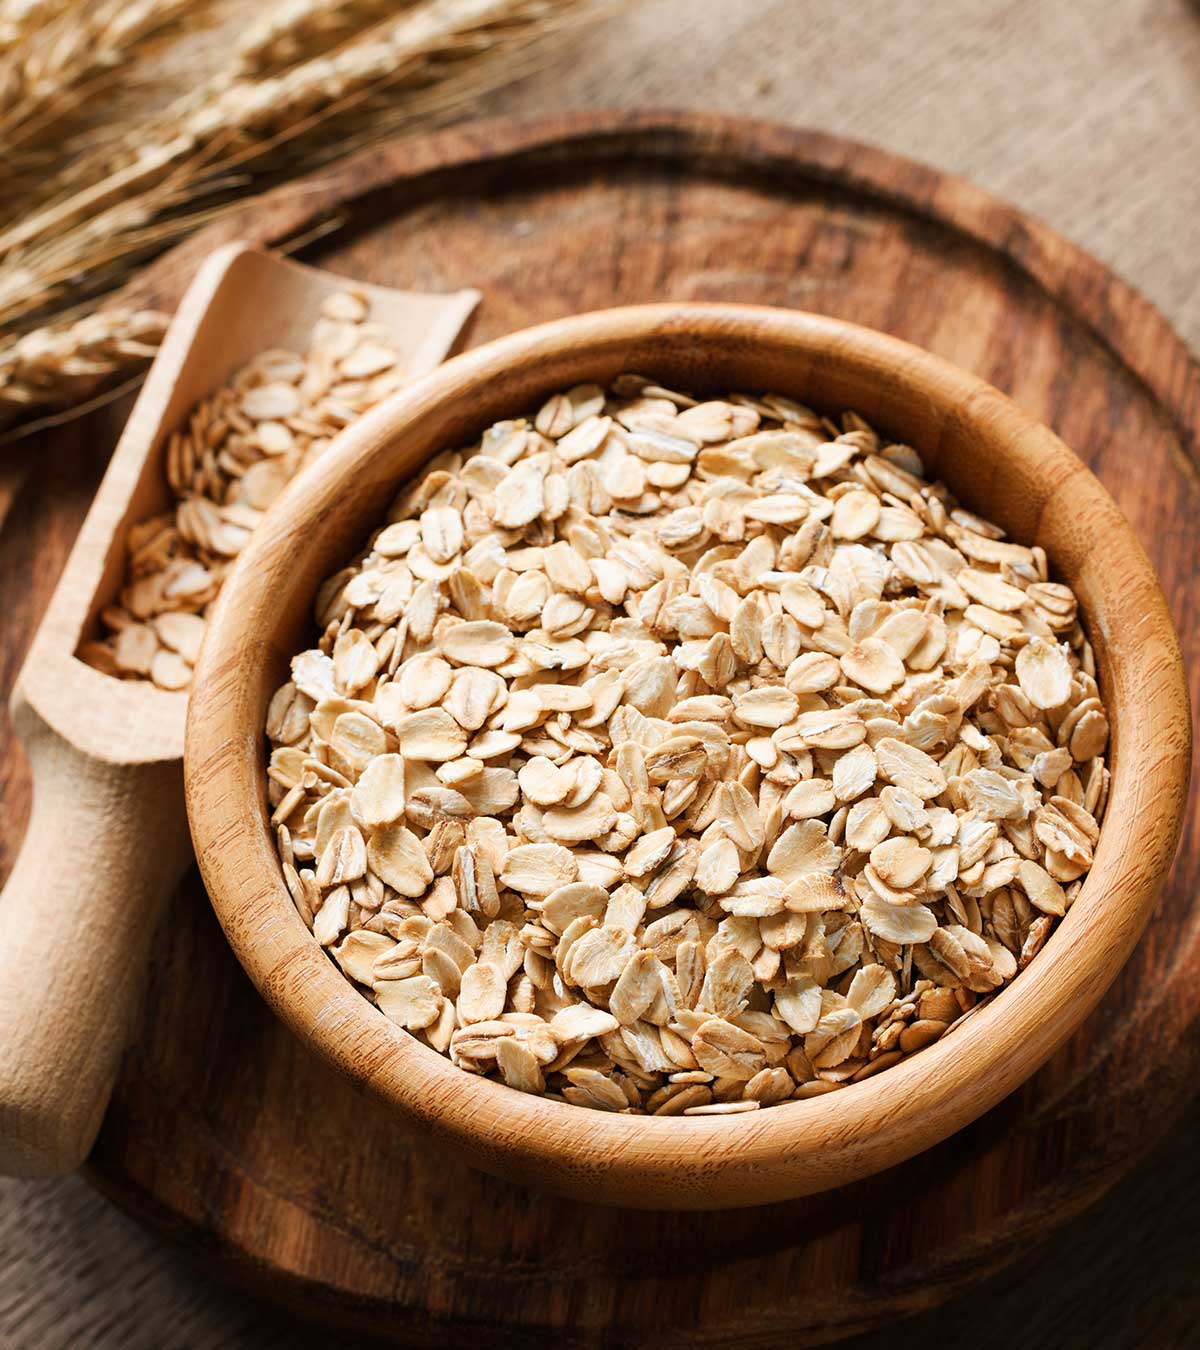 Is It Safe To Consume Oats During Pregnancy?